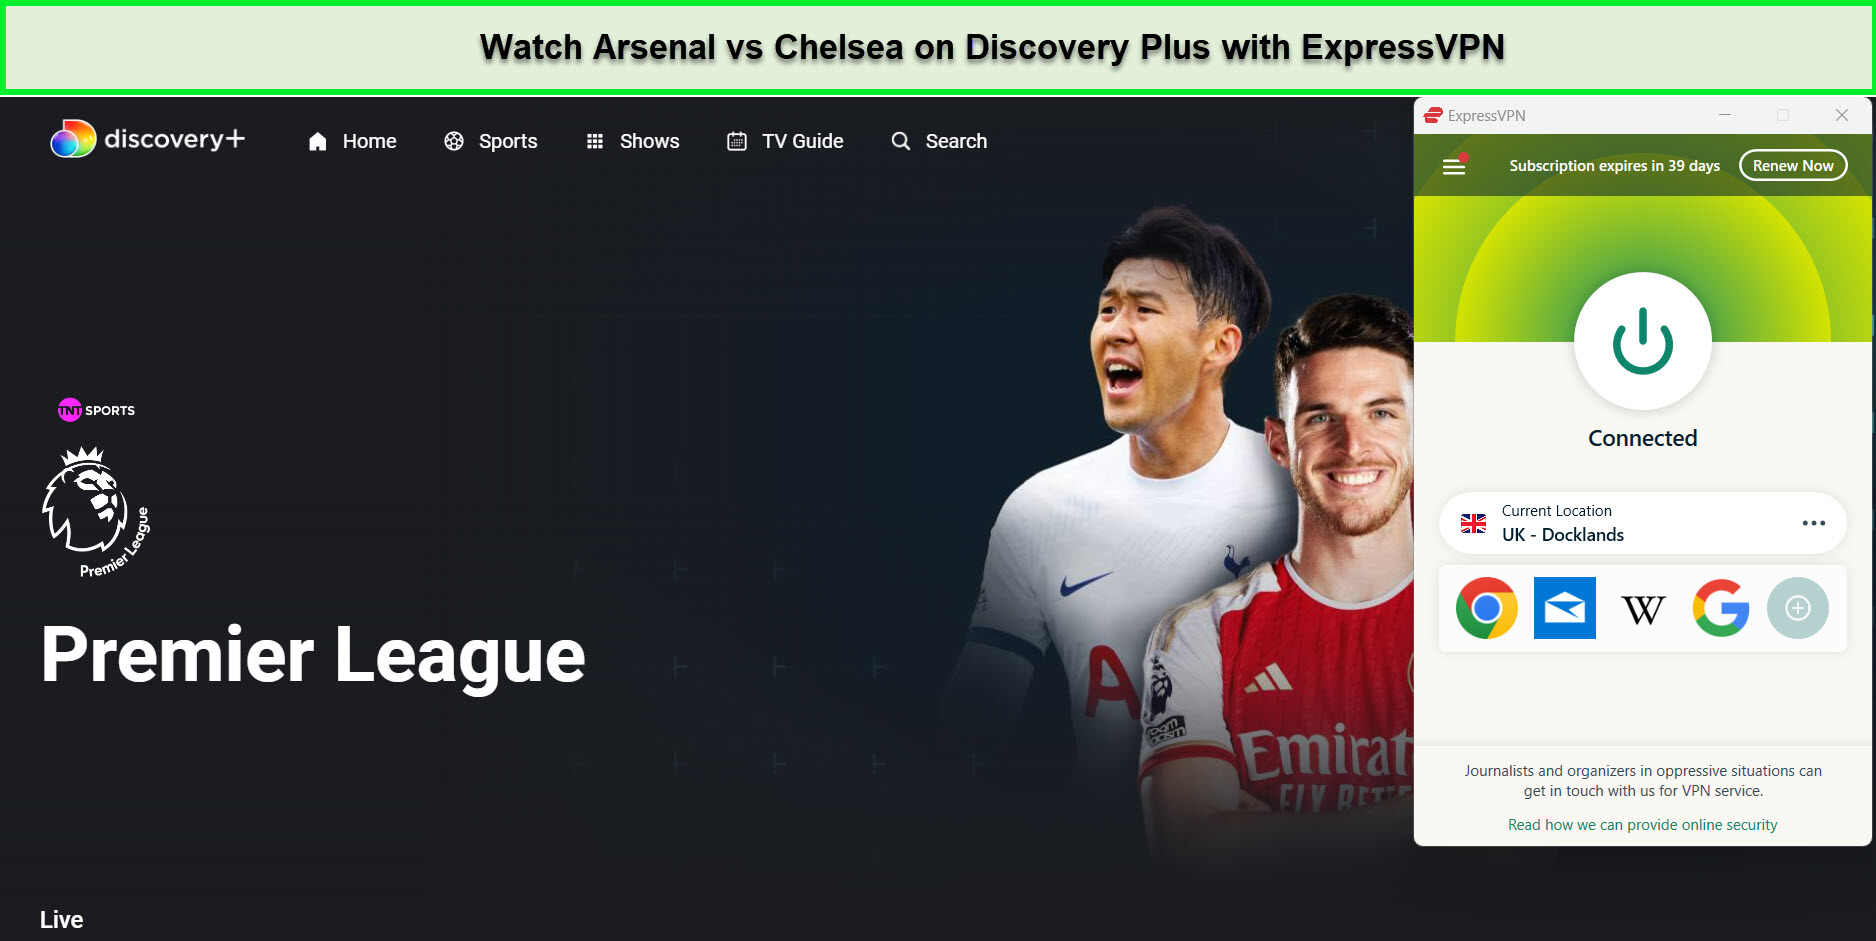 Watch-Arsenal-vs-Chelsea-in-Canada-on-Discovery-Plus-with-ExpressVPN